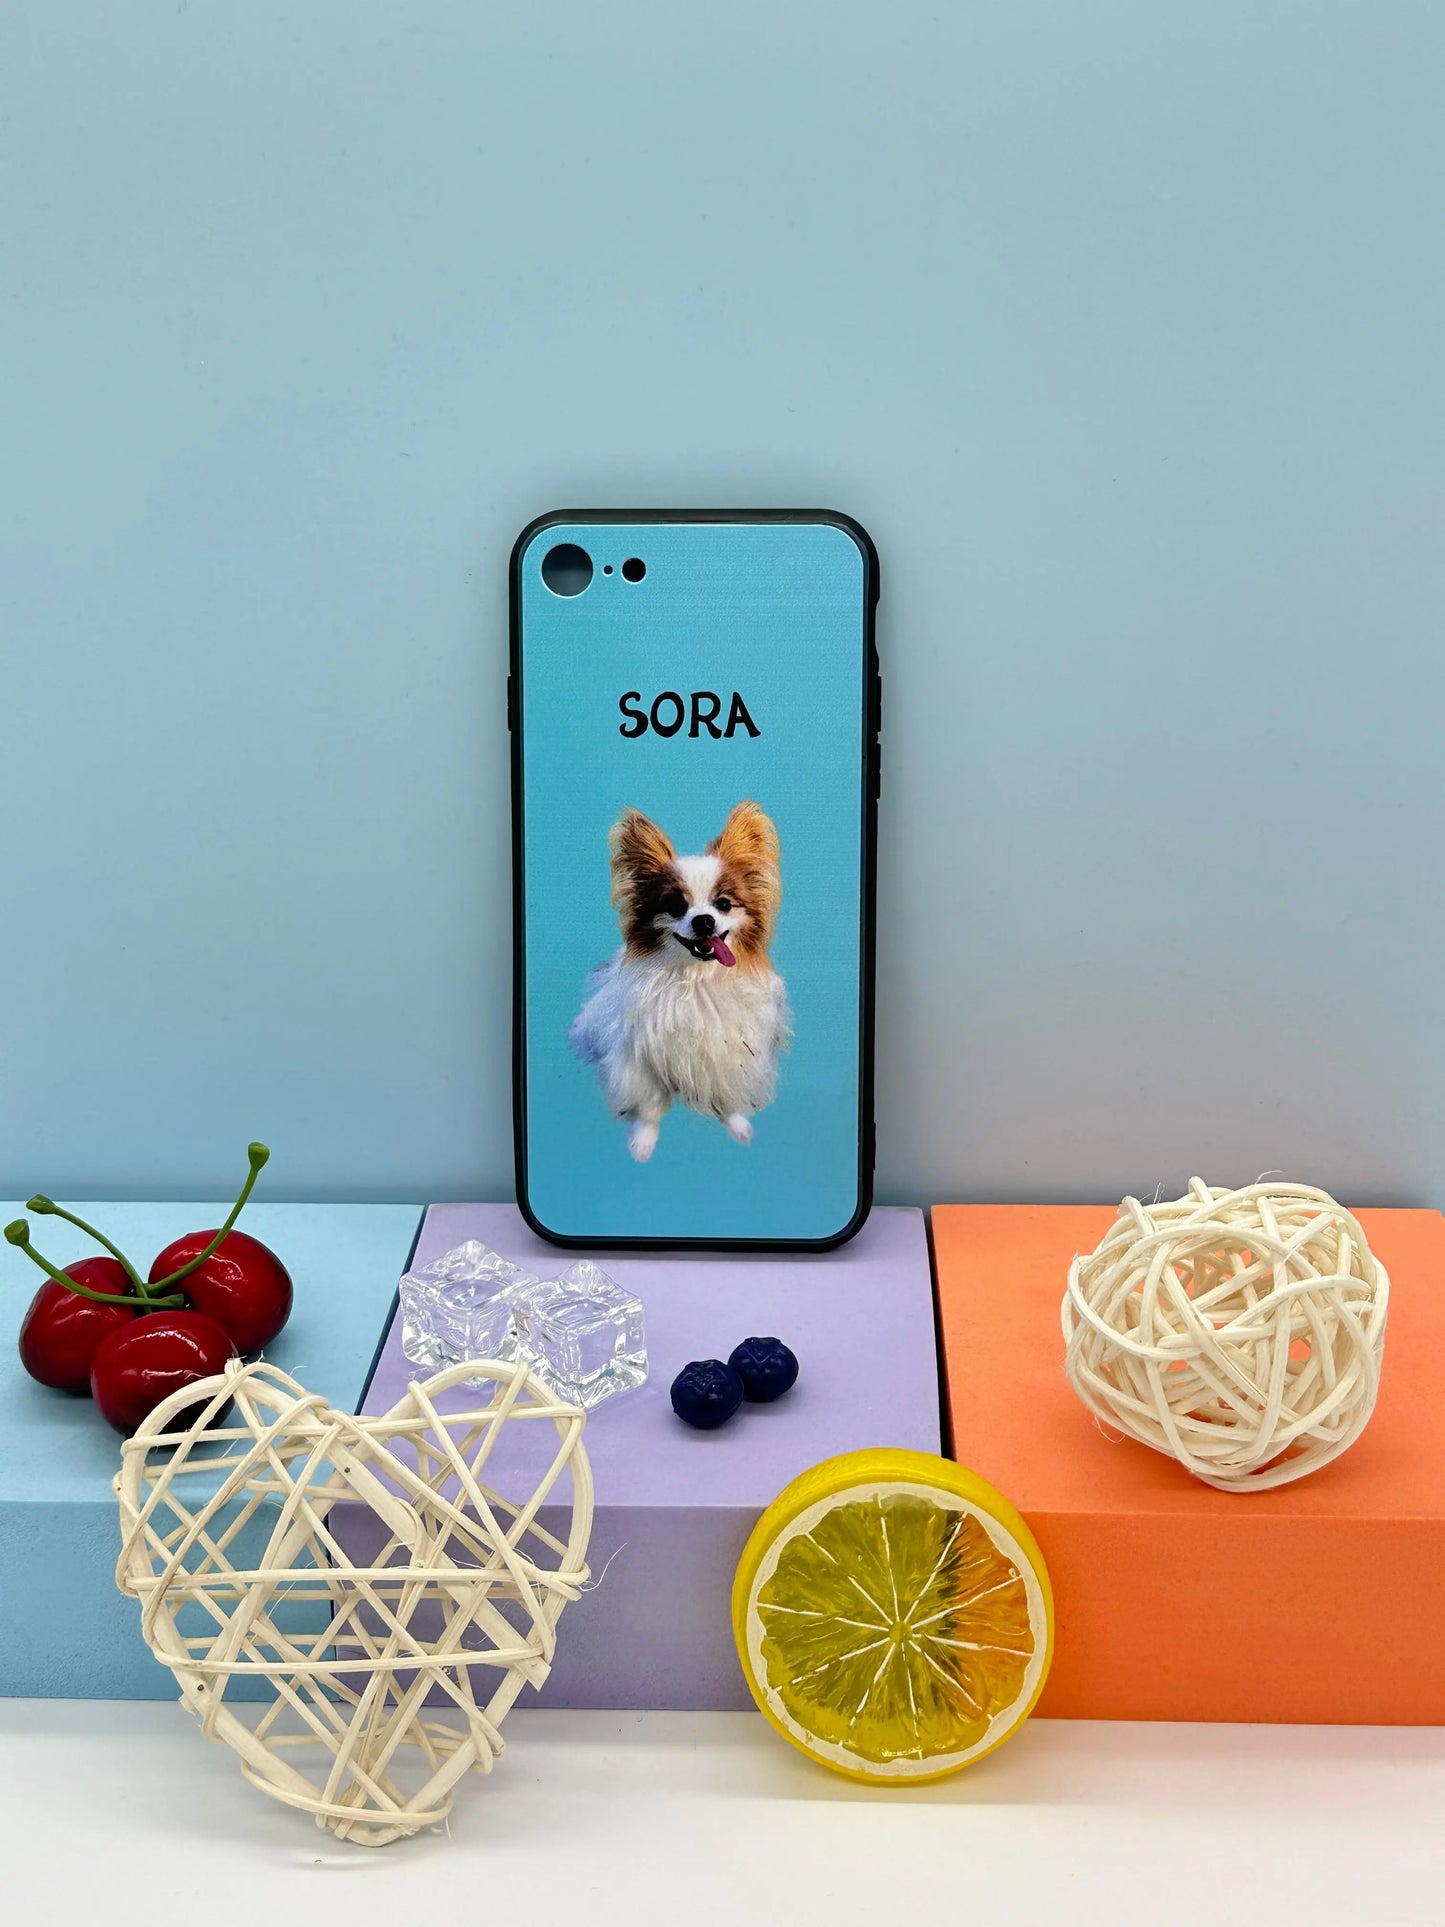 Personalized iPhone Samsung Case Cut out person, pets with name Sunday's Creative